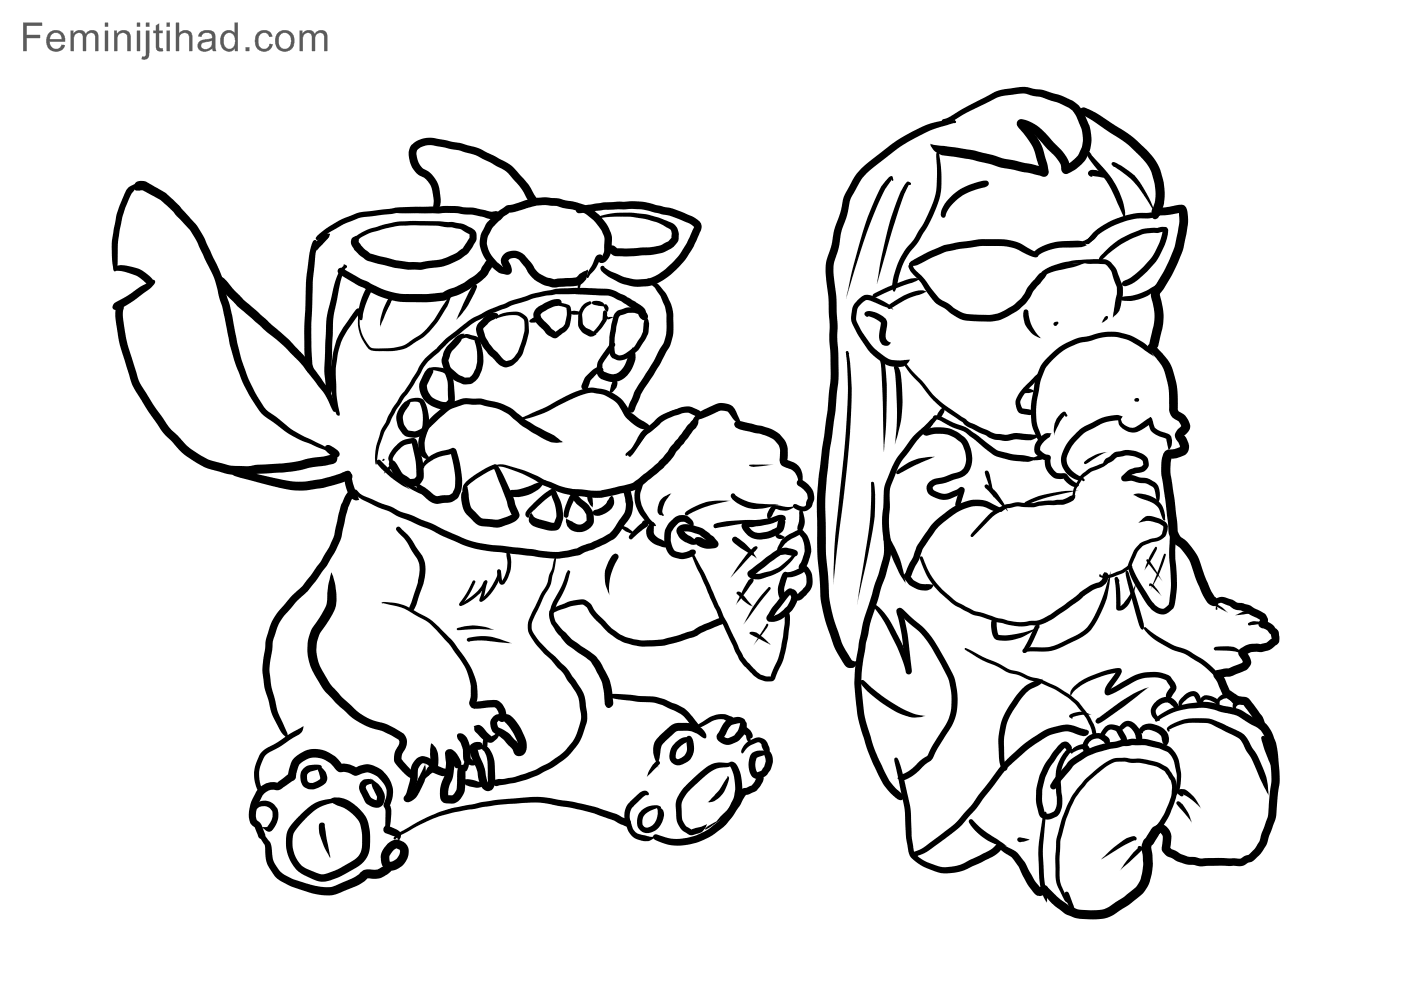 Disney Stitch Coloring Pages at GetColorings.com | Free printable